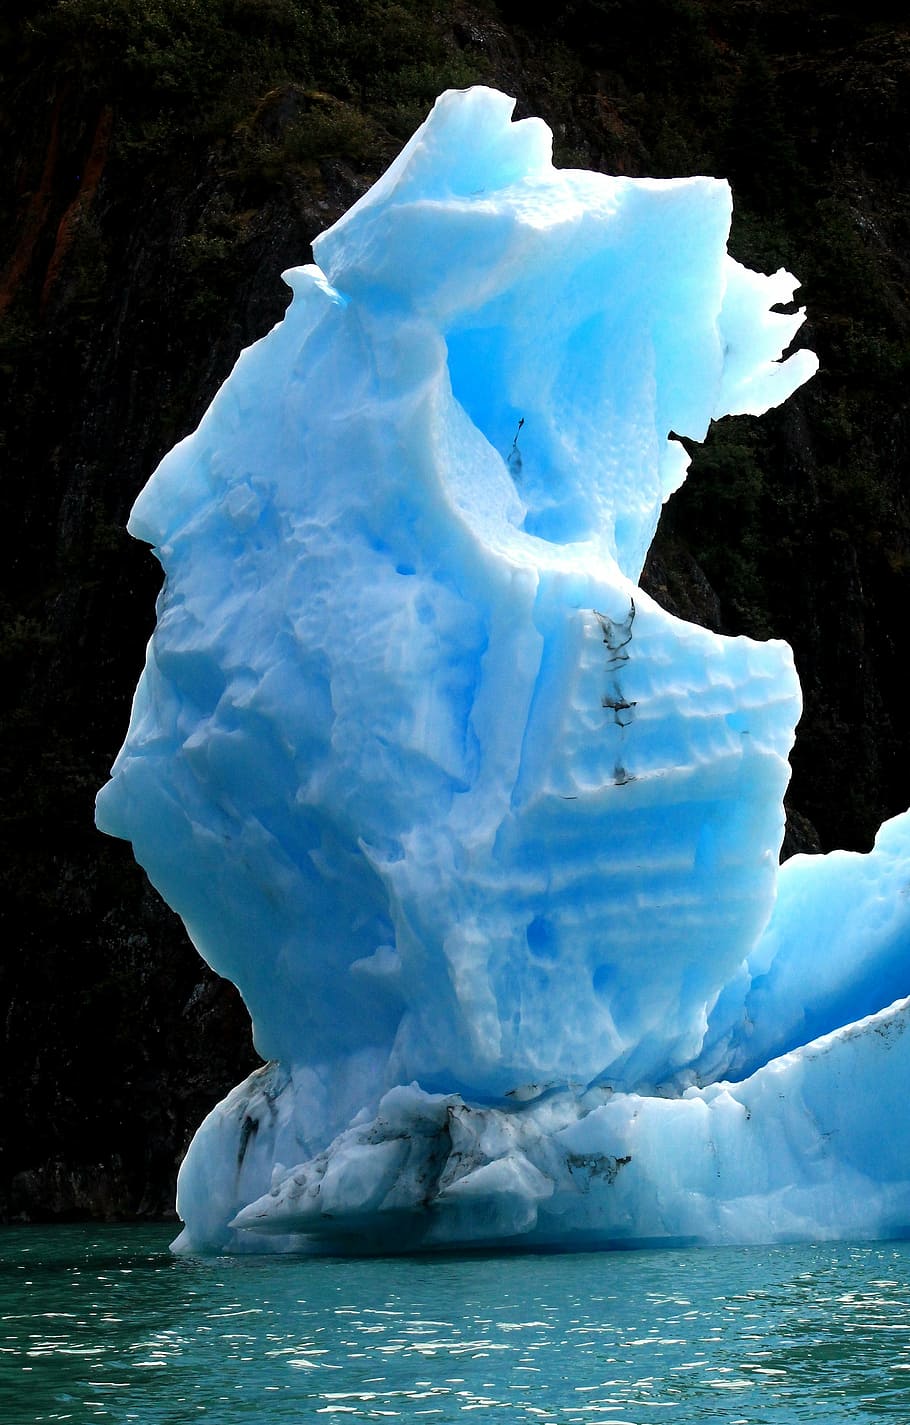 ice burg, iceberg, blue, fjord, frozen, floating, glacial, ice, water, nature